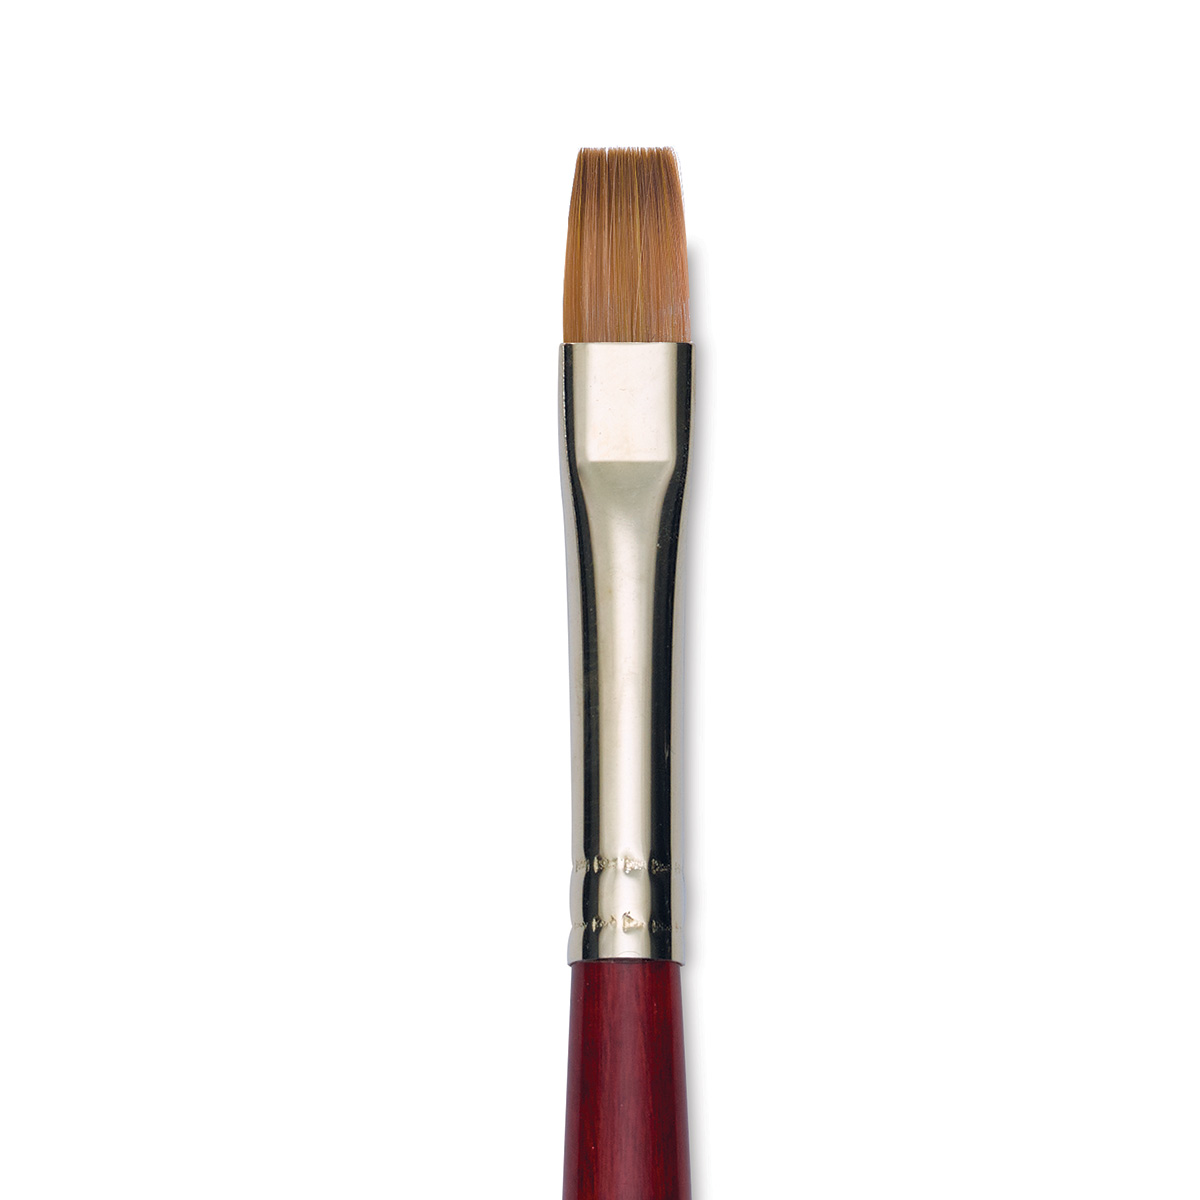 Princeton Synthetic Sable Brush - Bright, Long Handle, Size 10